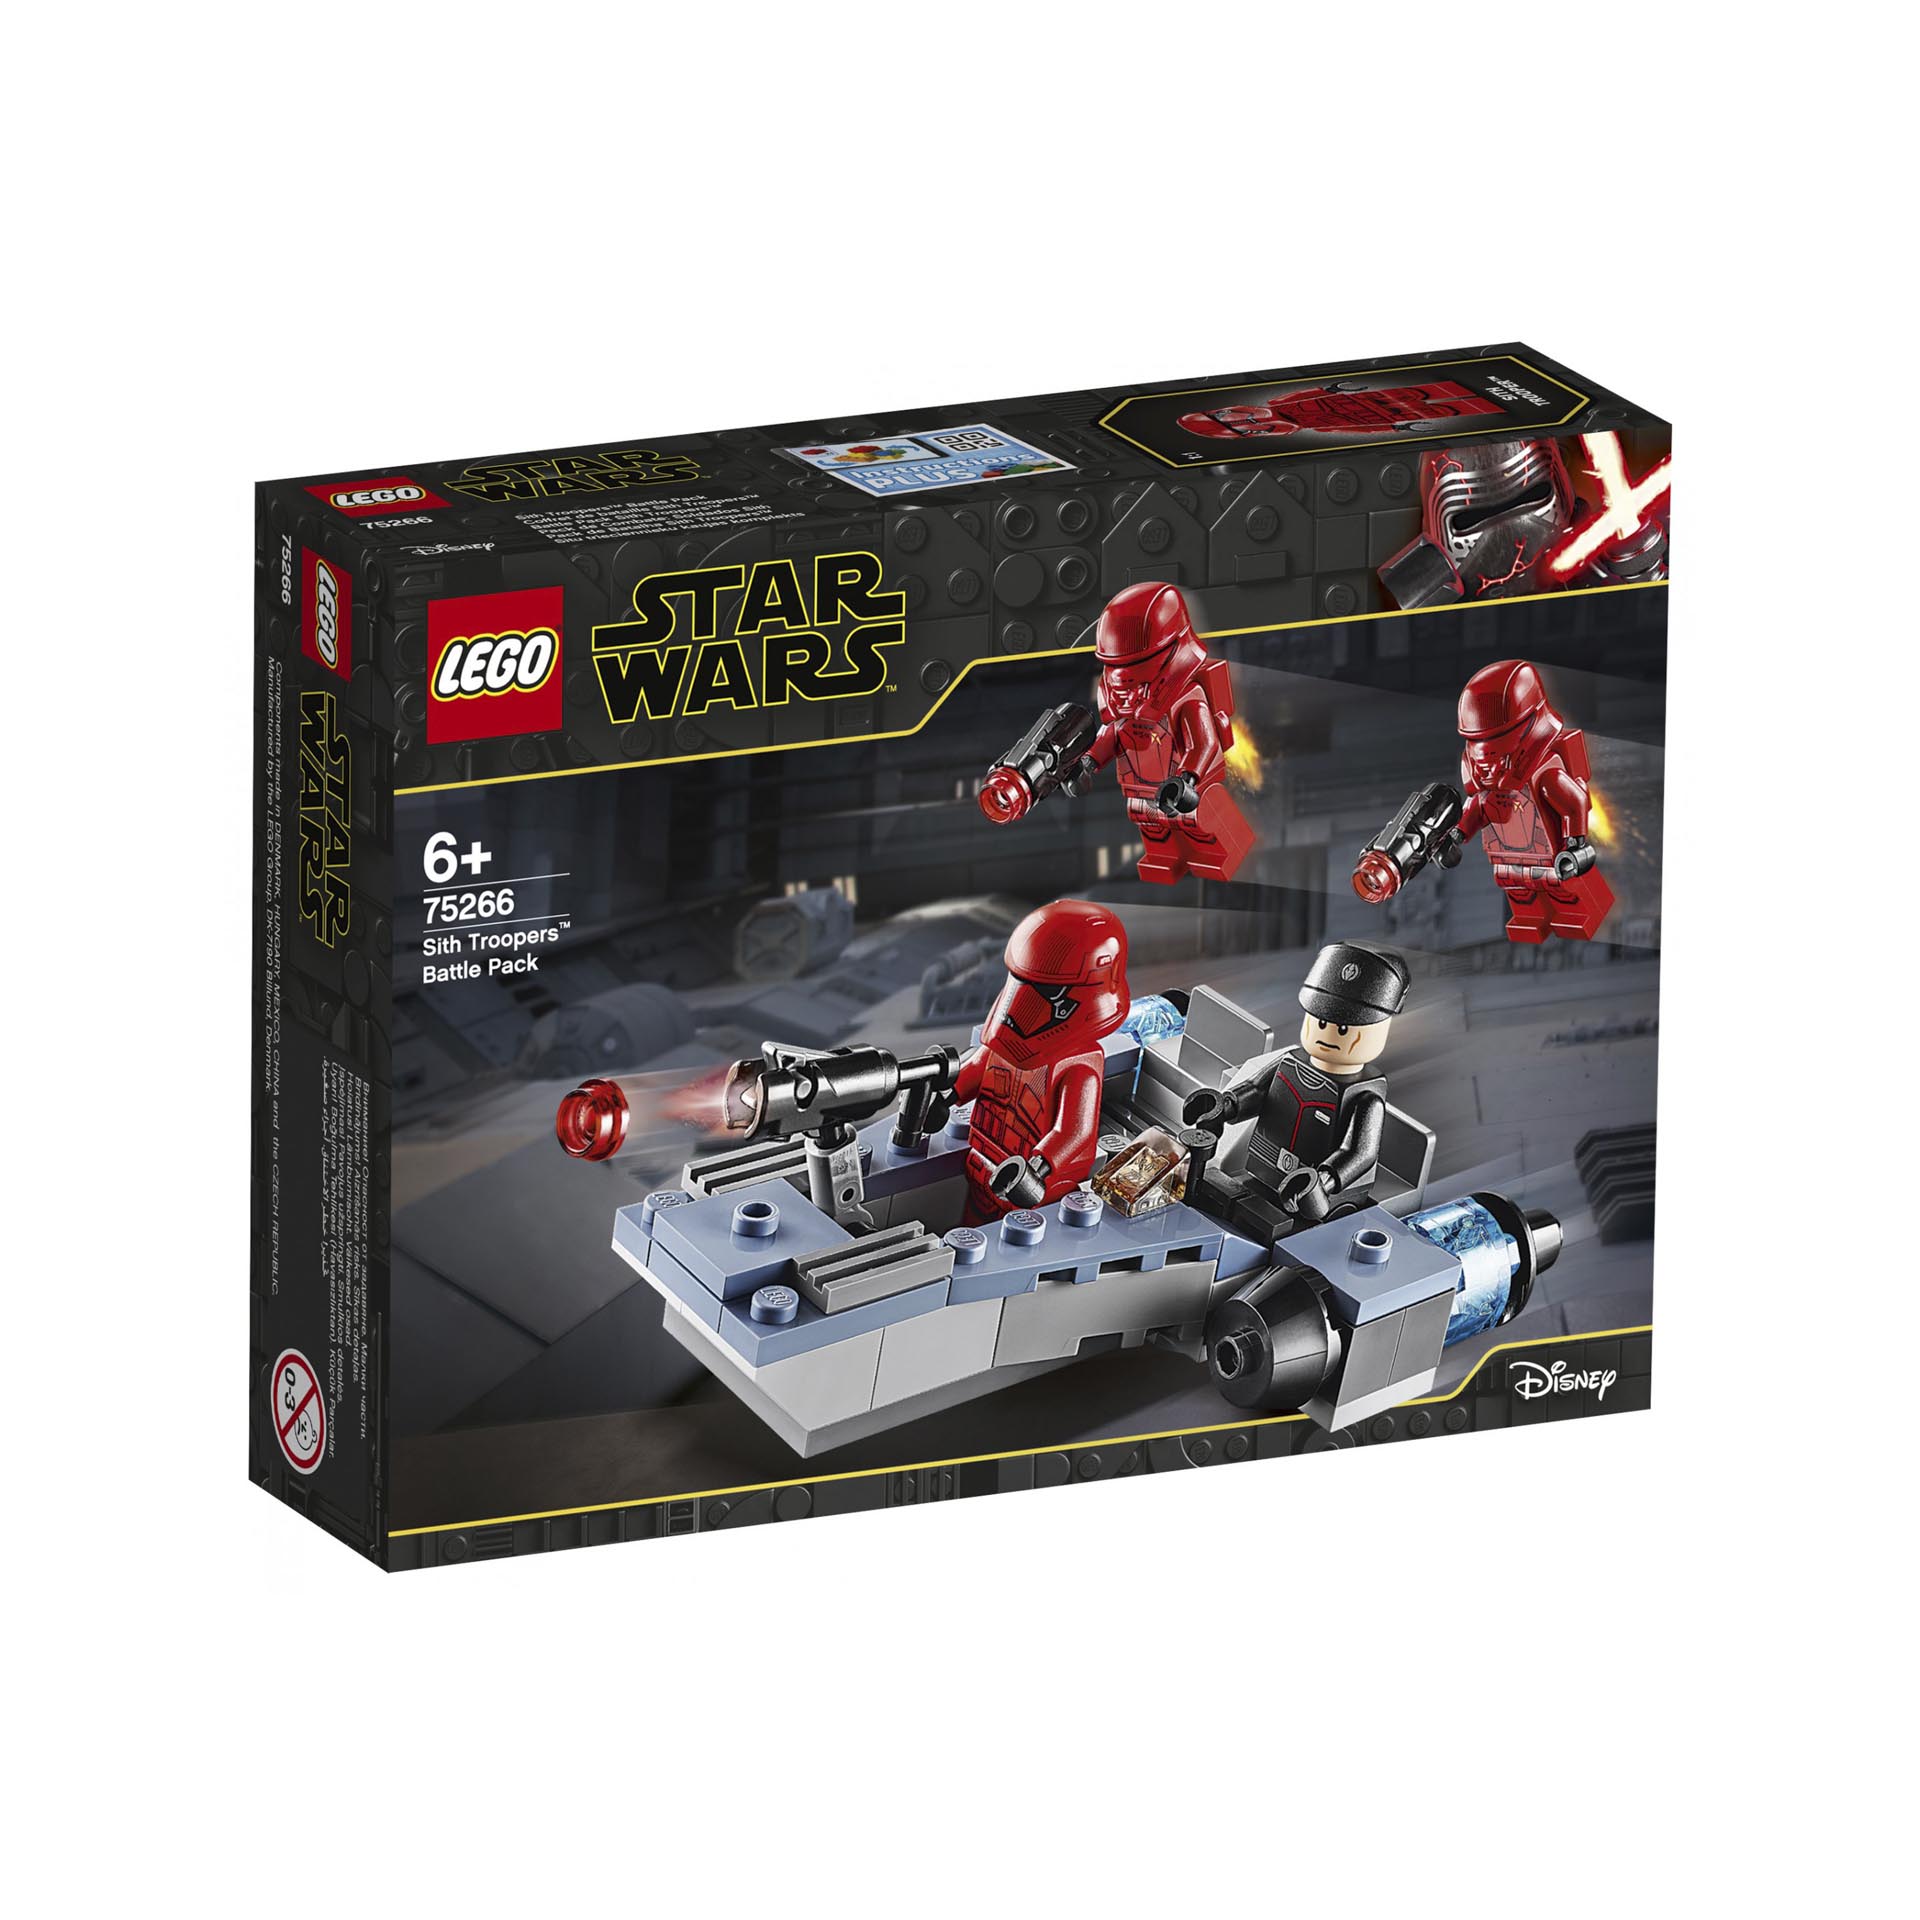 Battle Pack Sith Troopers 75266, , large